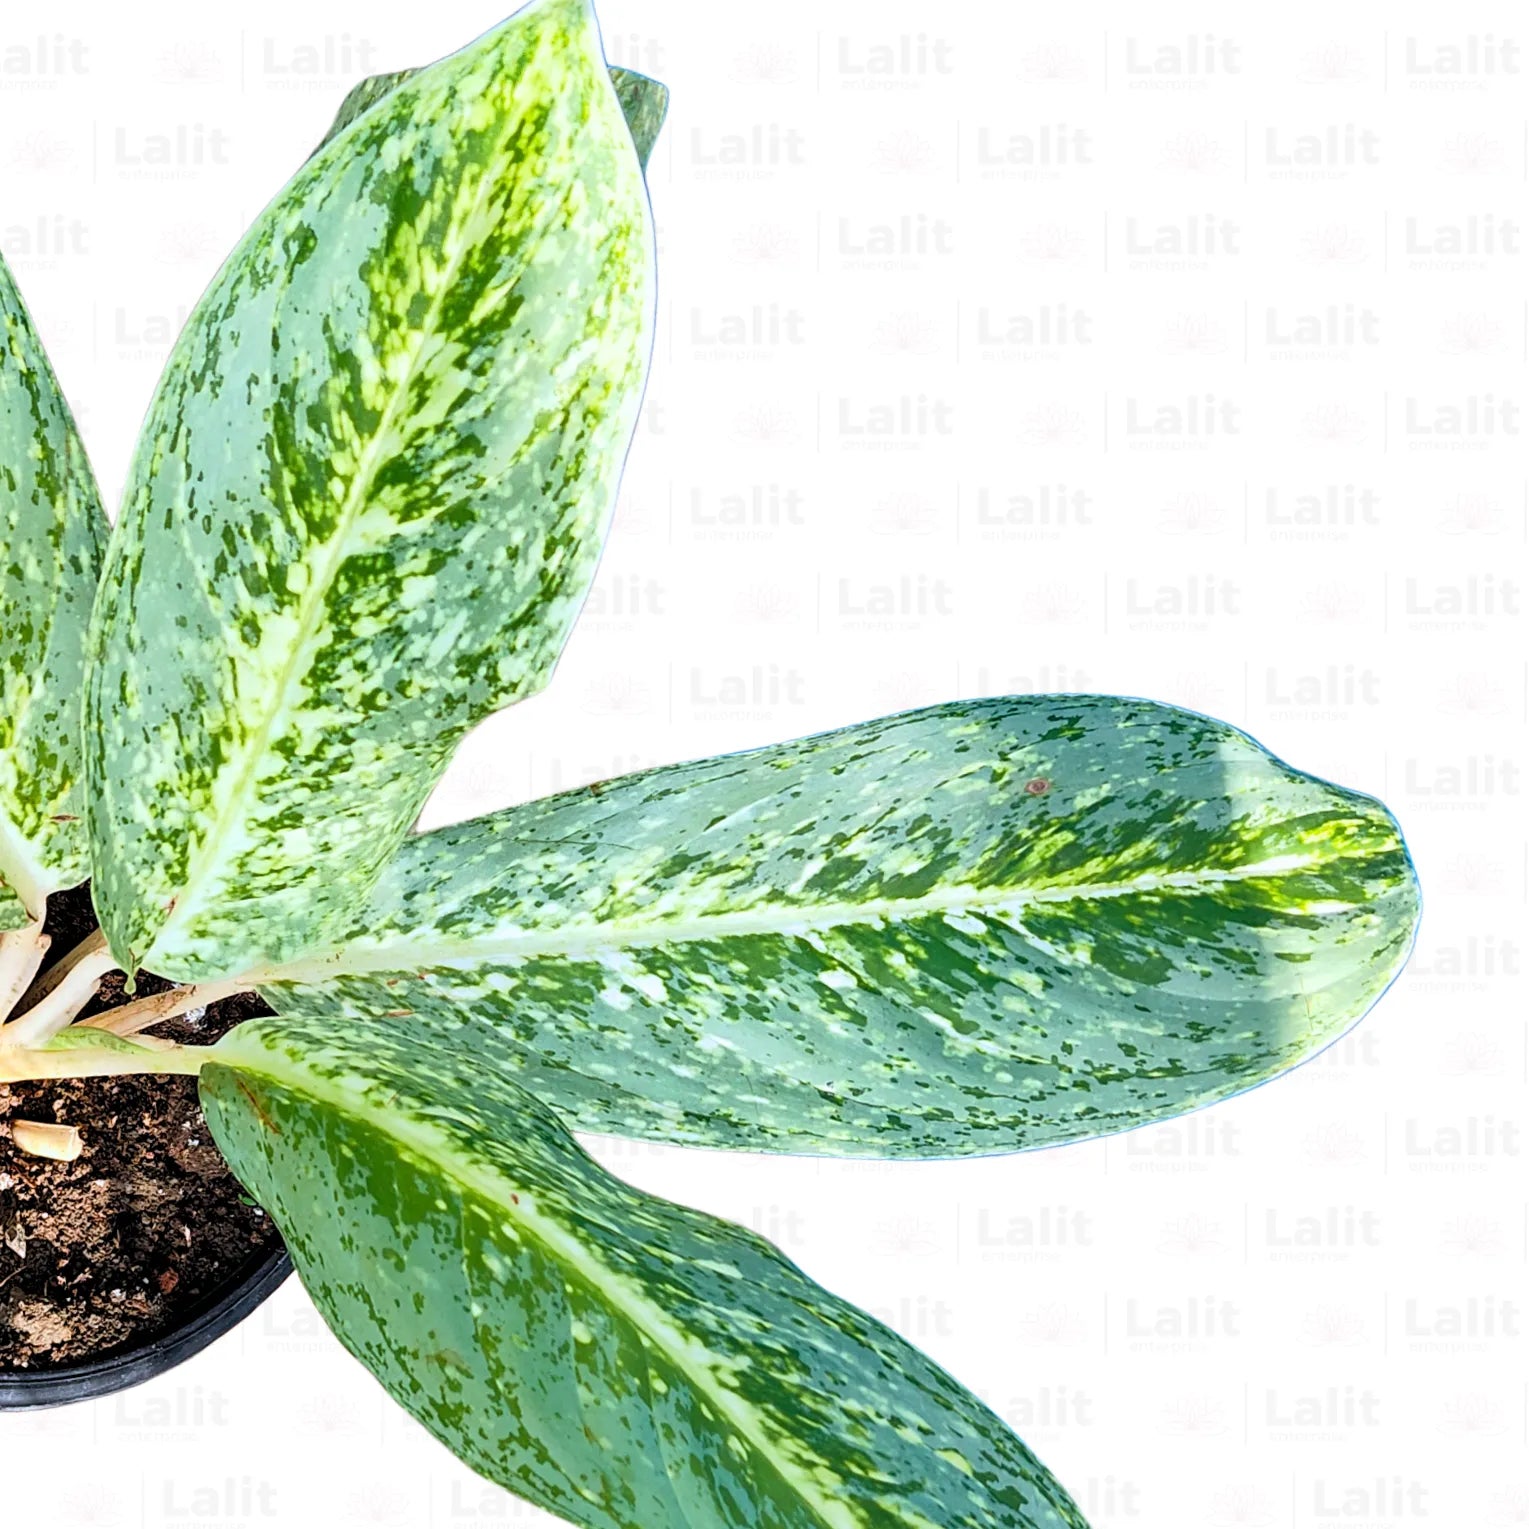 Buy Aglaonema Butterfly - Plant Online at Lalitenterprise